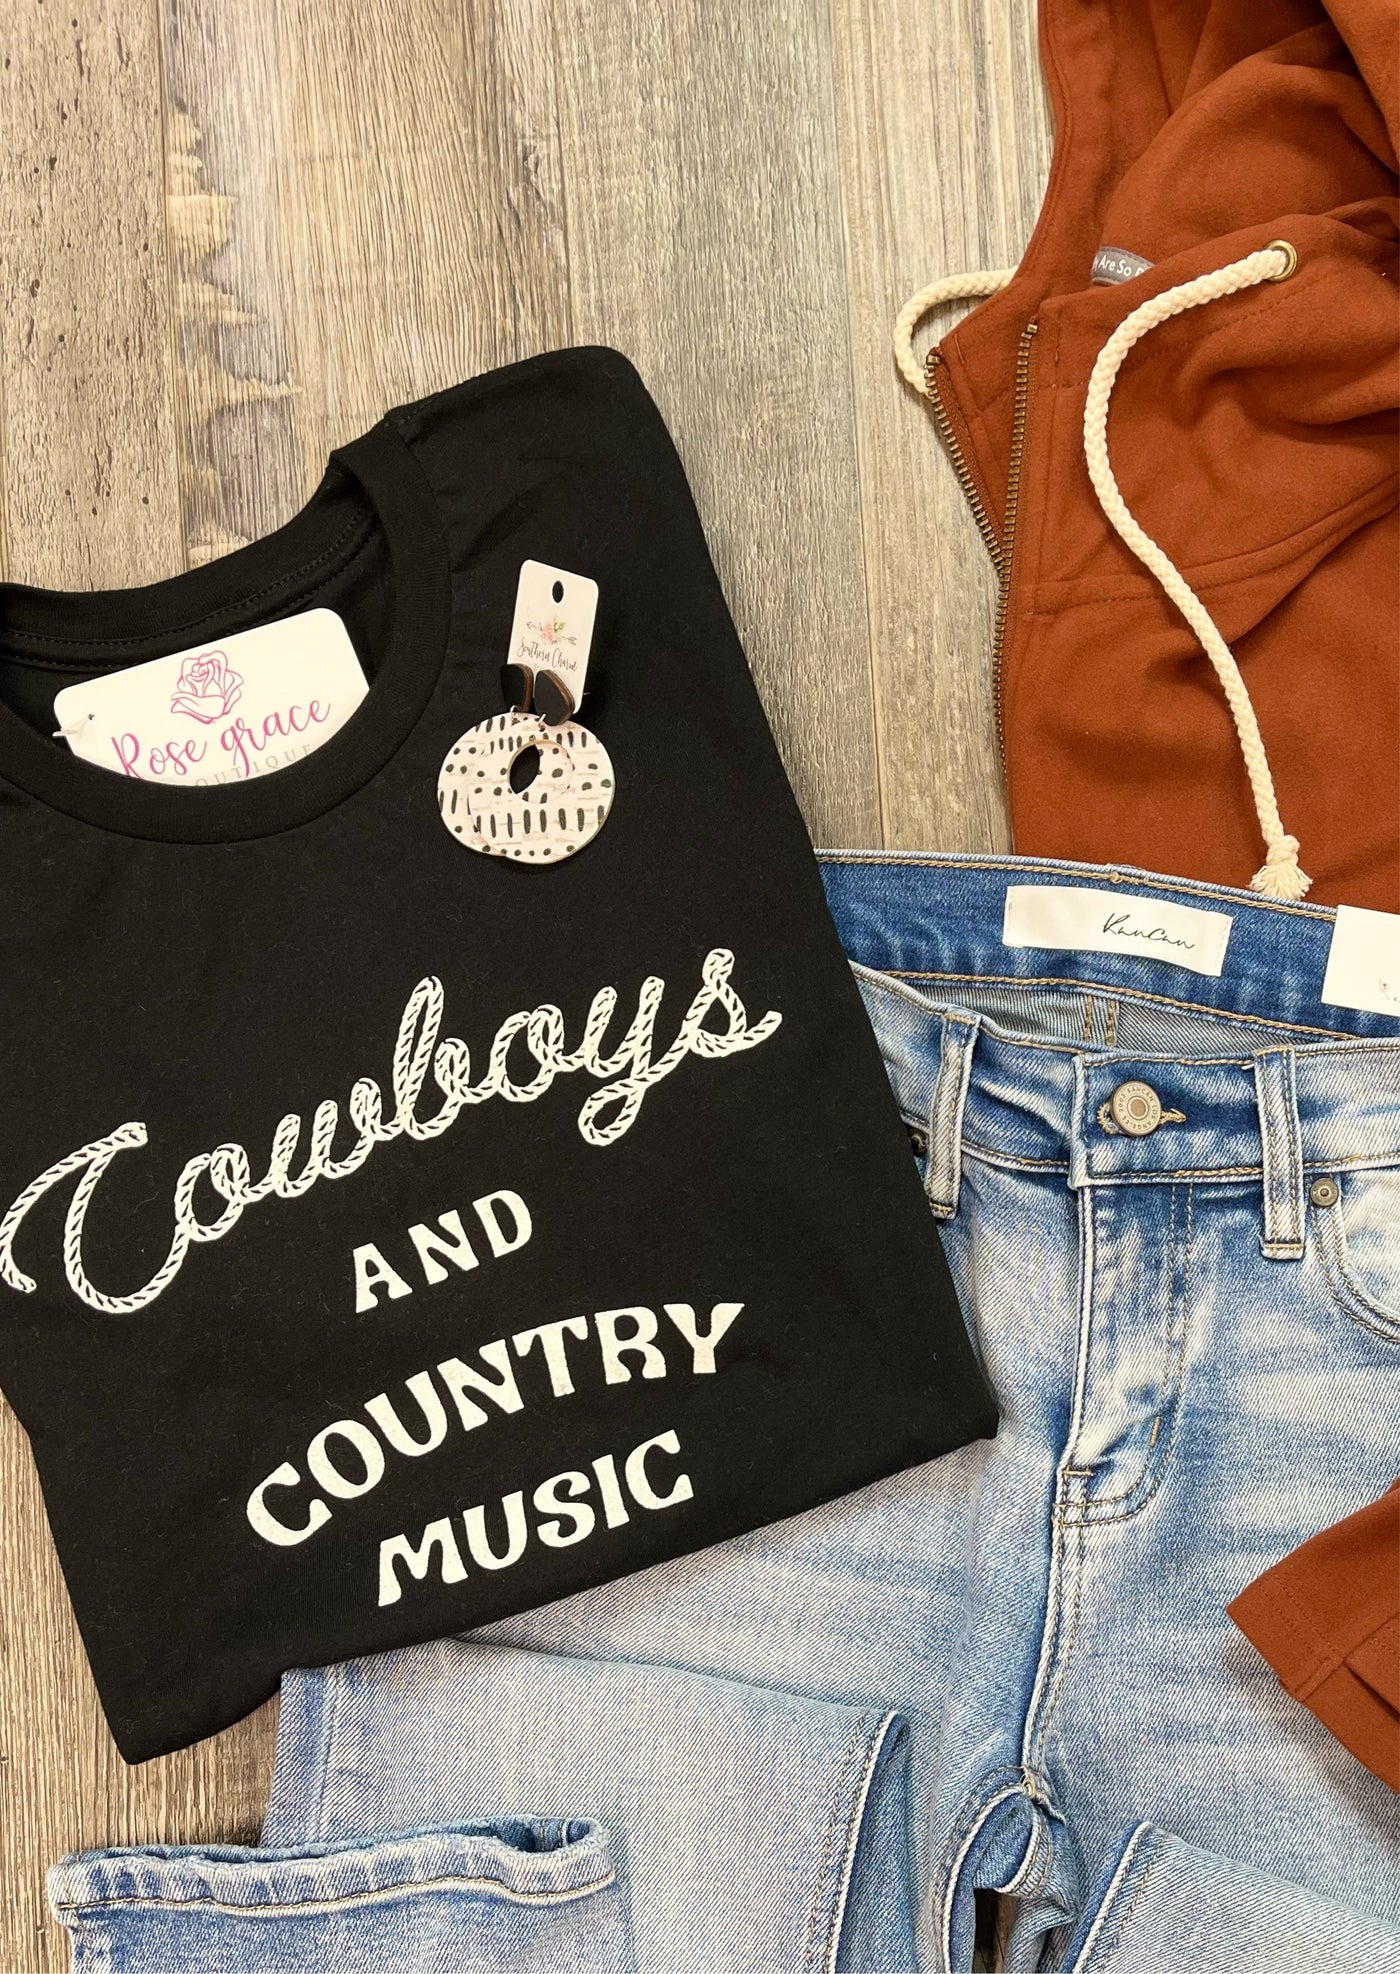 Cowboys and Country Music Graphic Tee - Rose Grace Boutique 